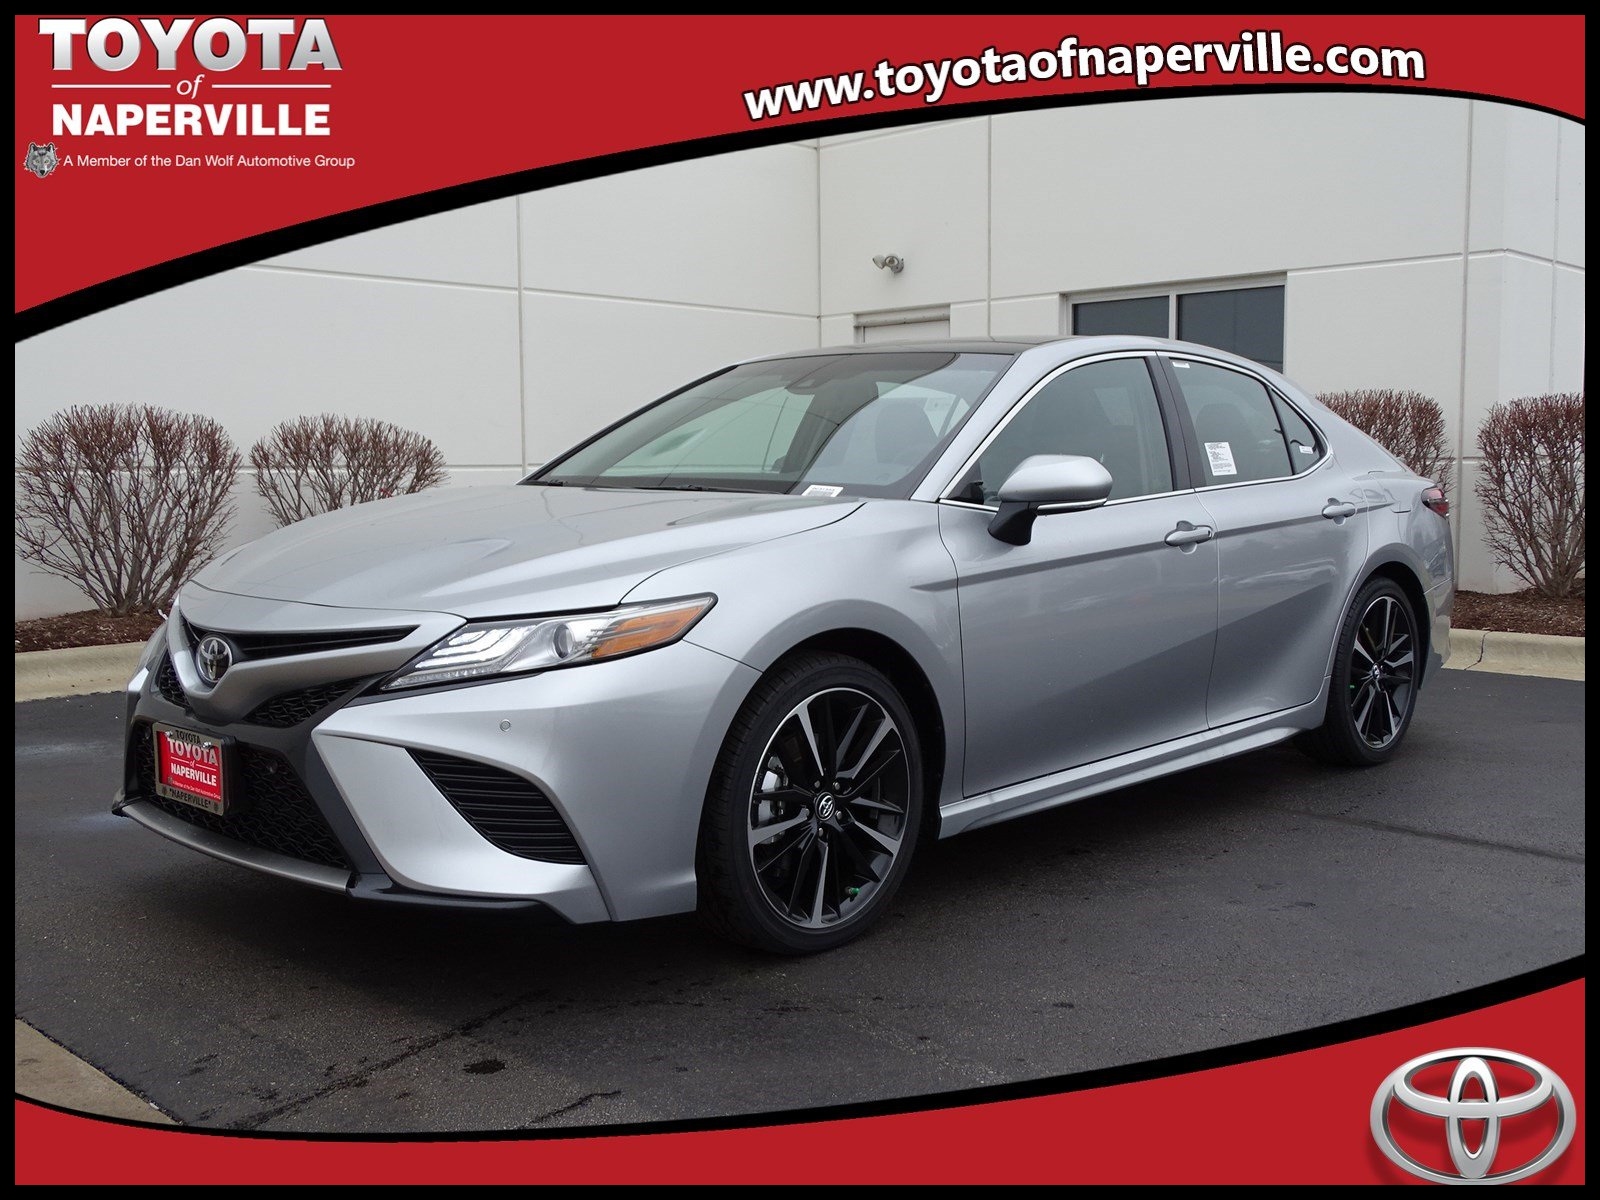 Top New 2018 toyota Camry Xse 4d Sedan In Naperville Dc Overview and Price